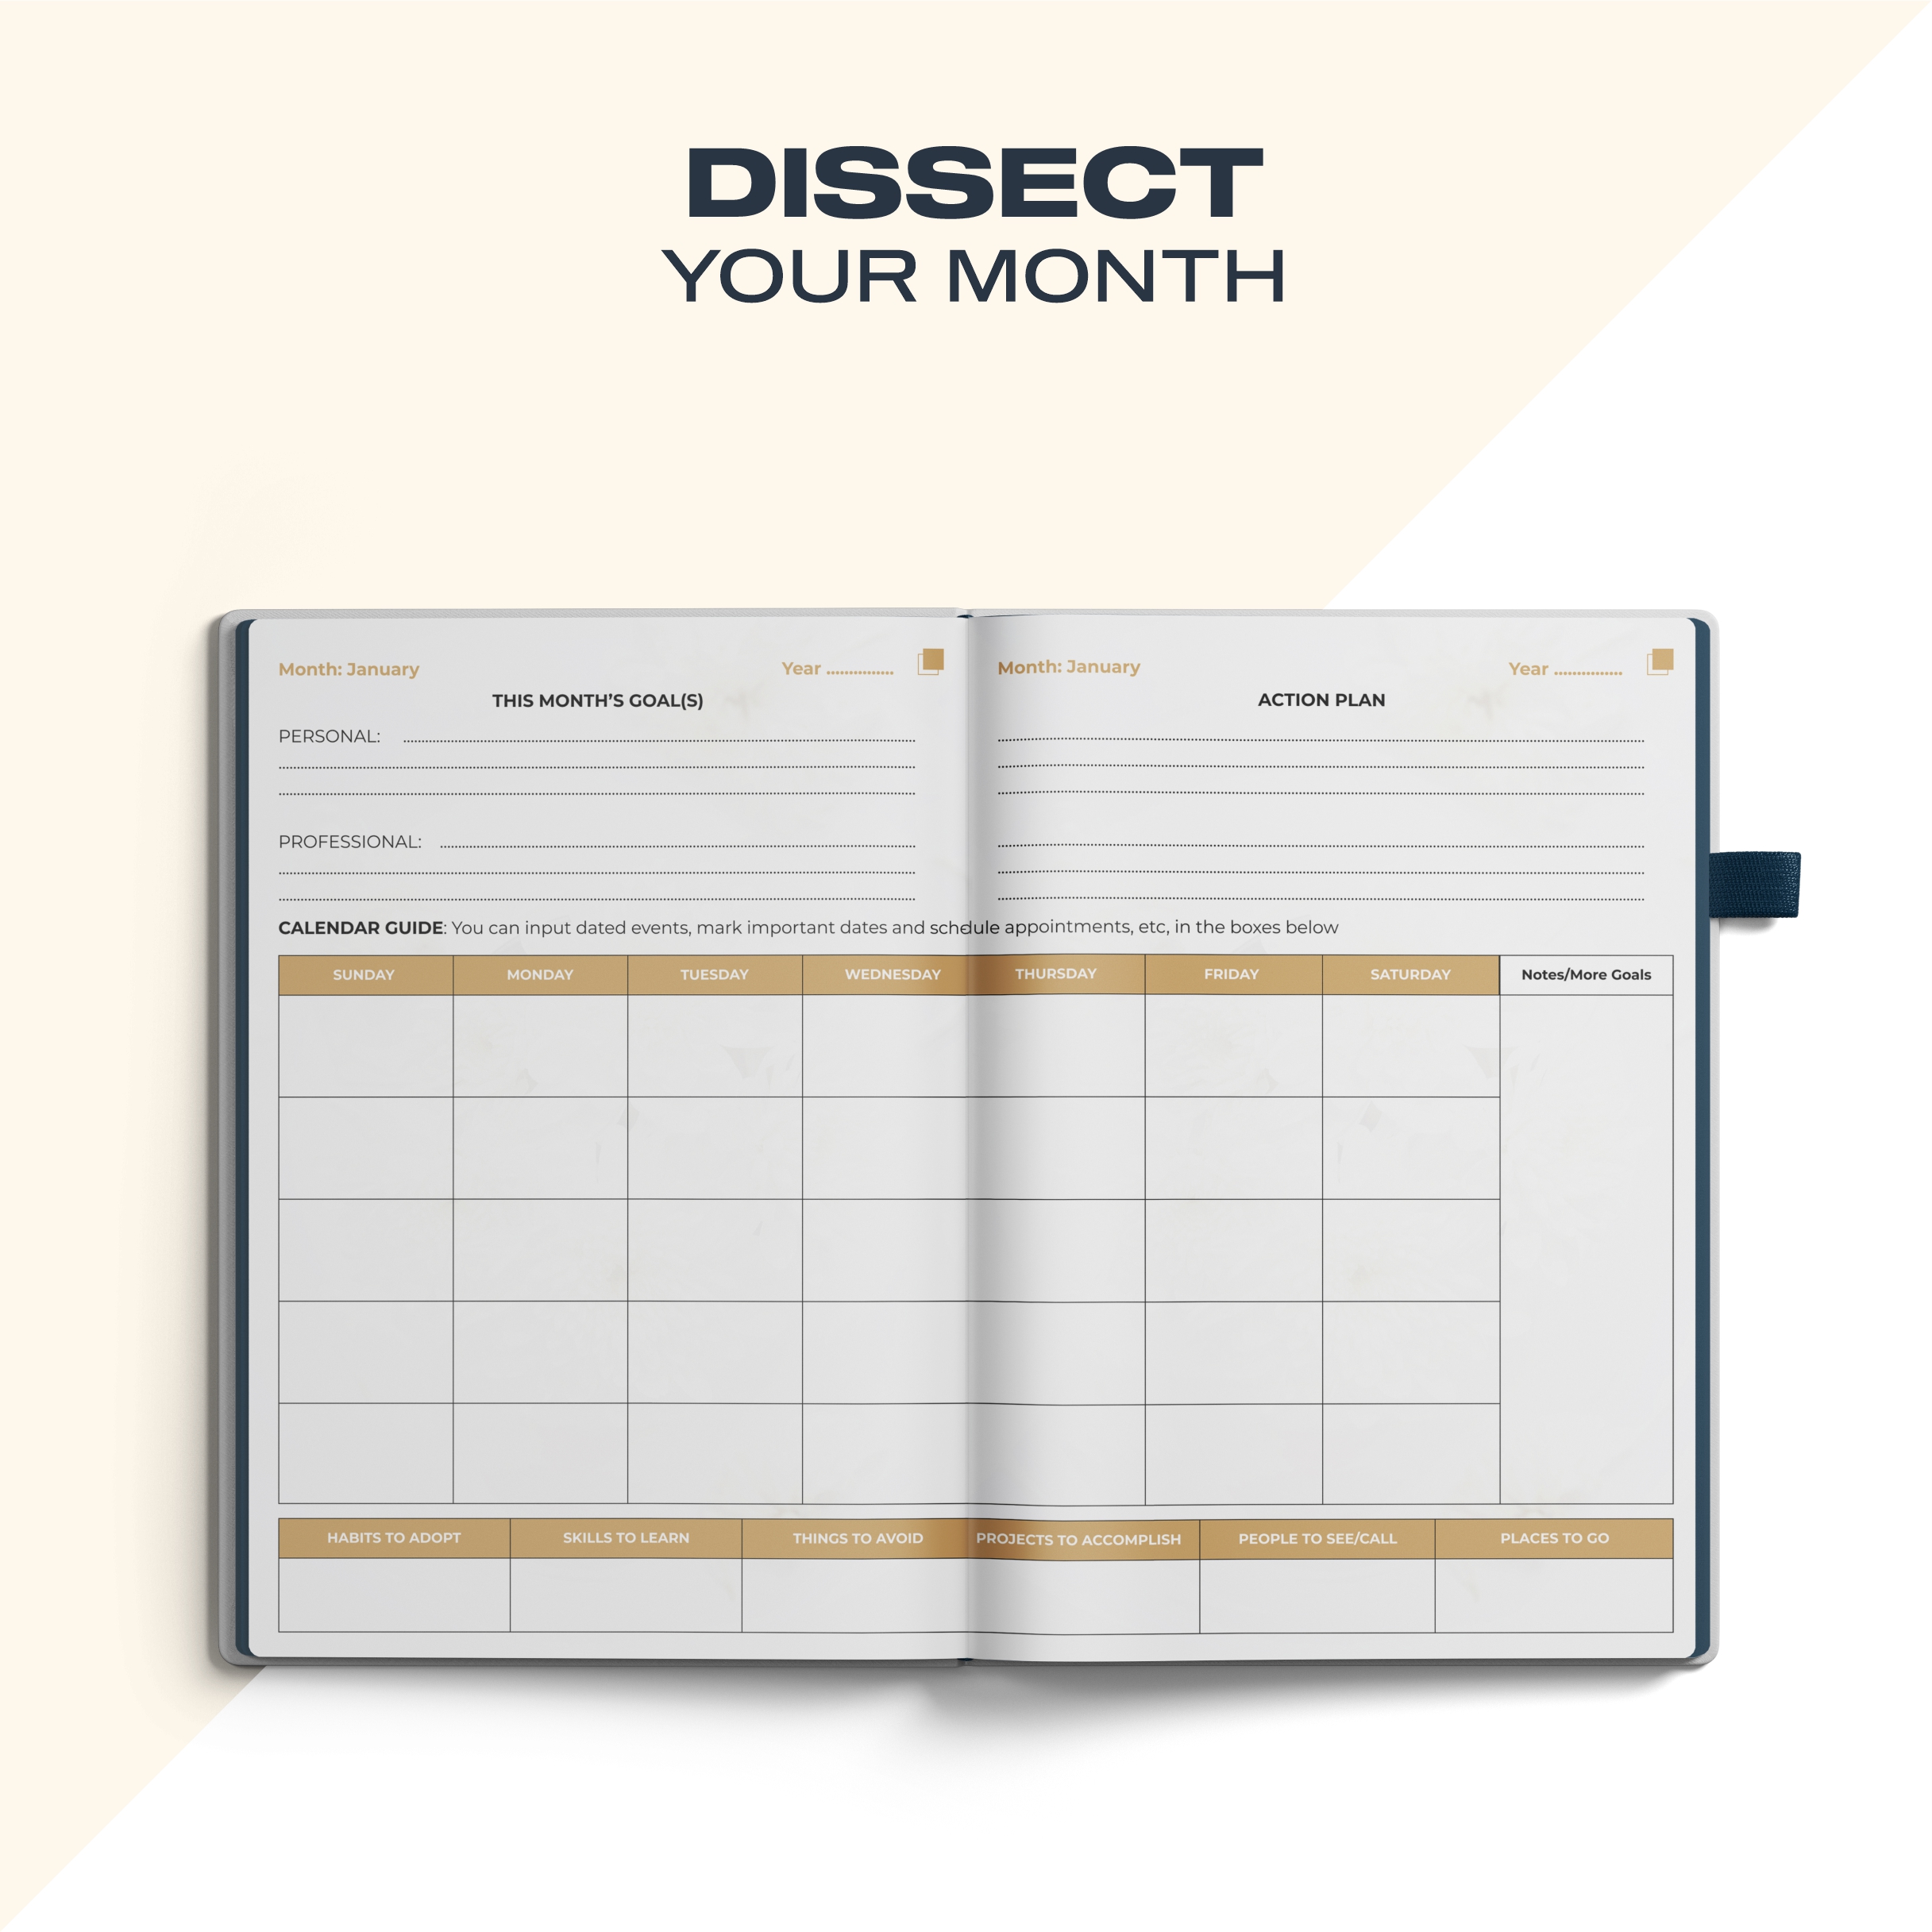 Dissect your Month